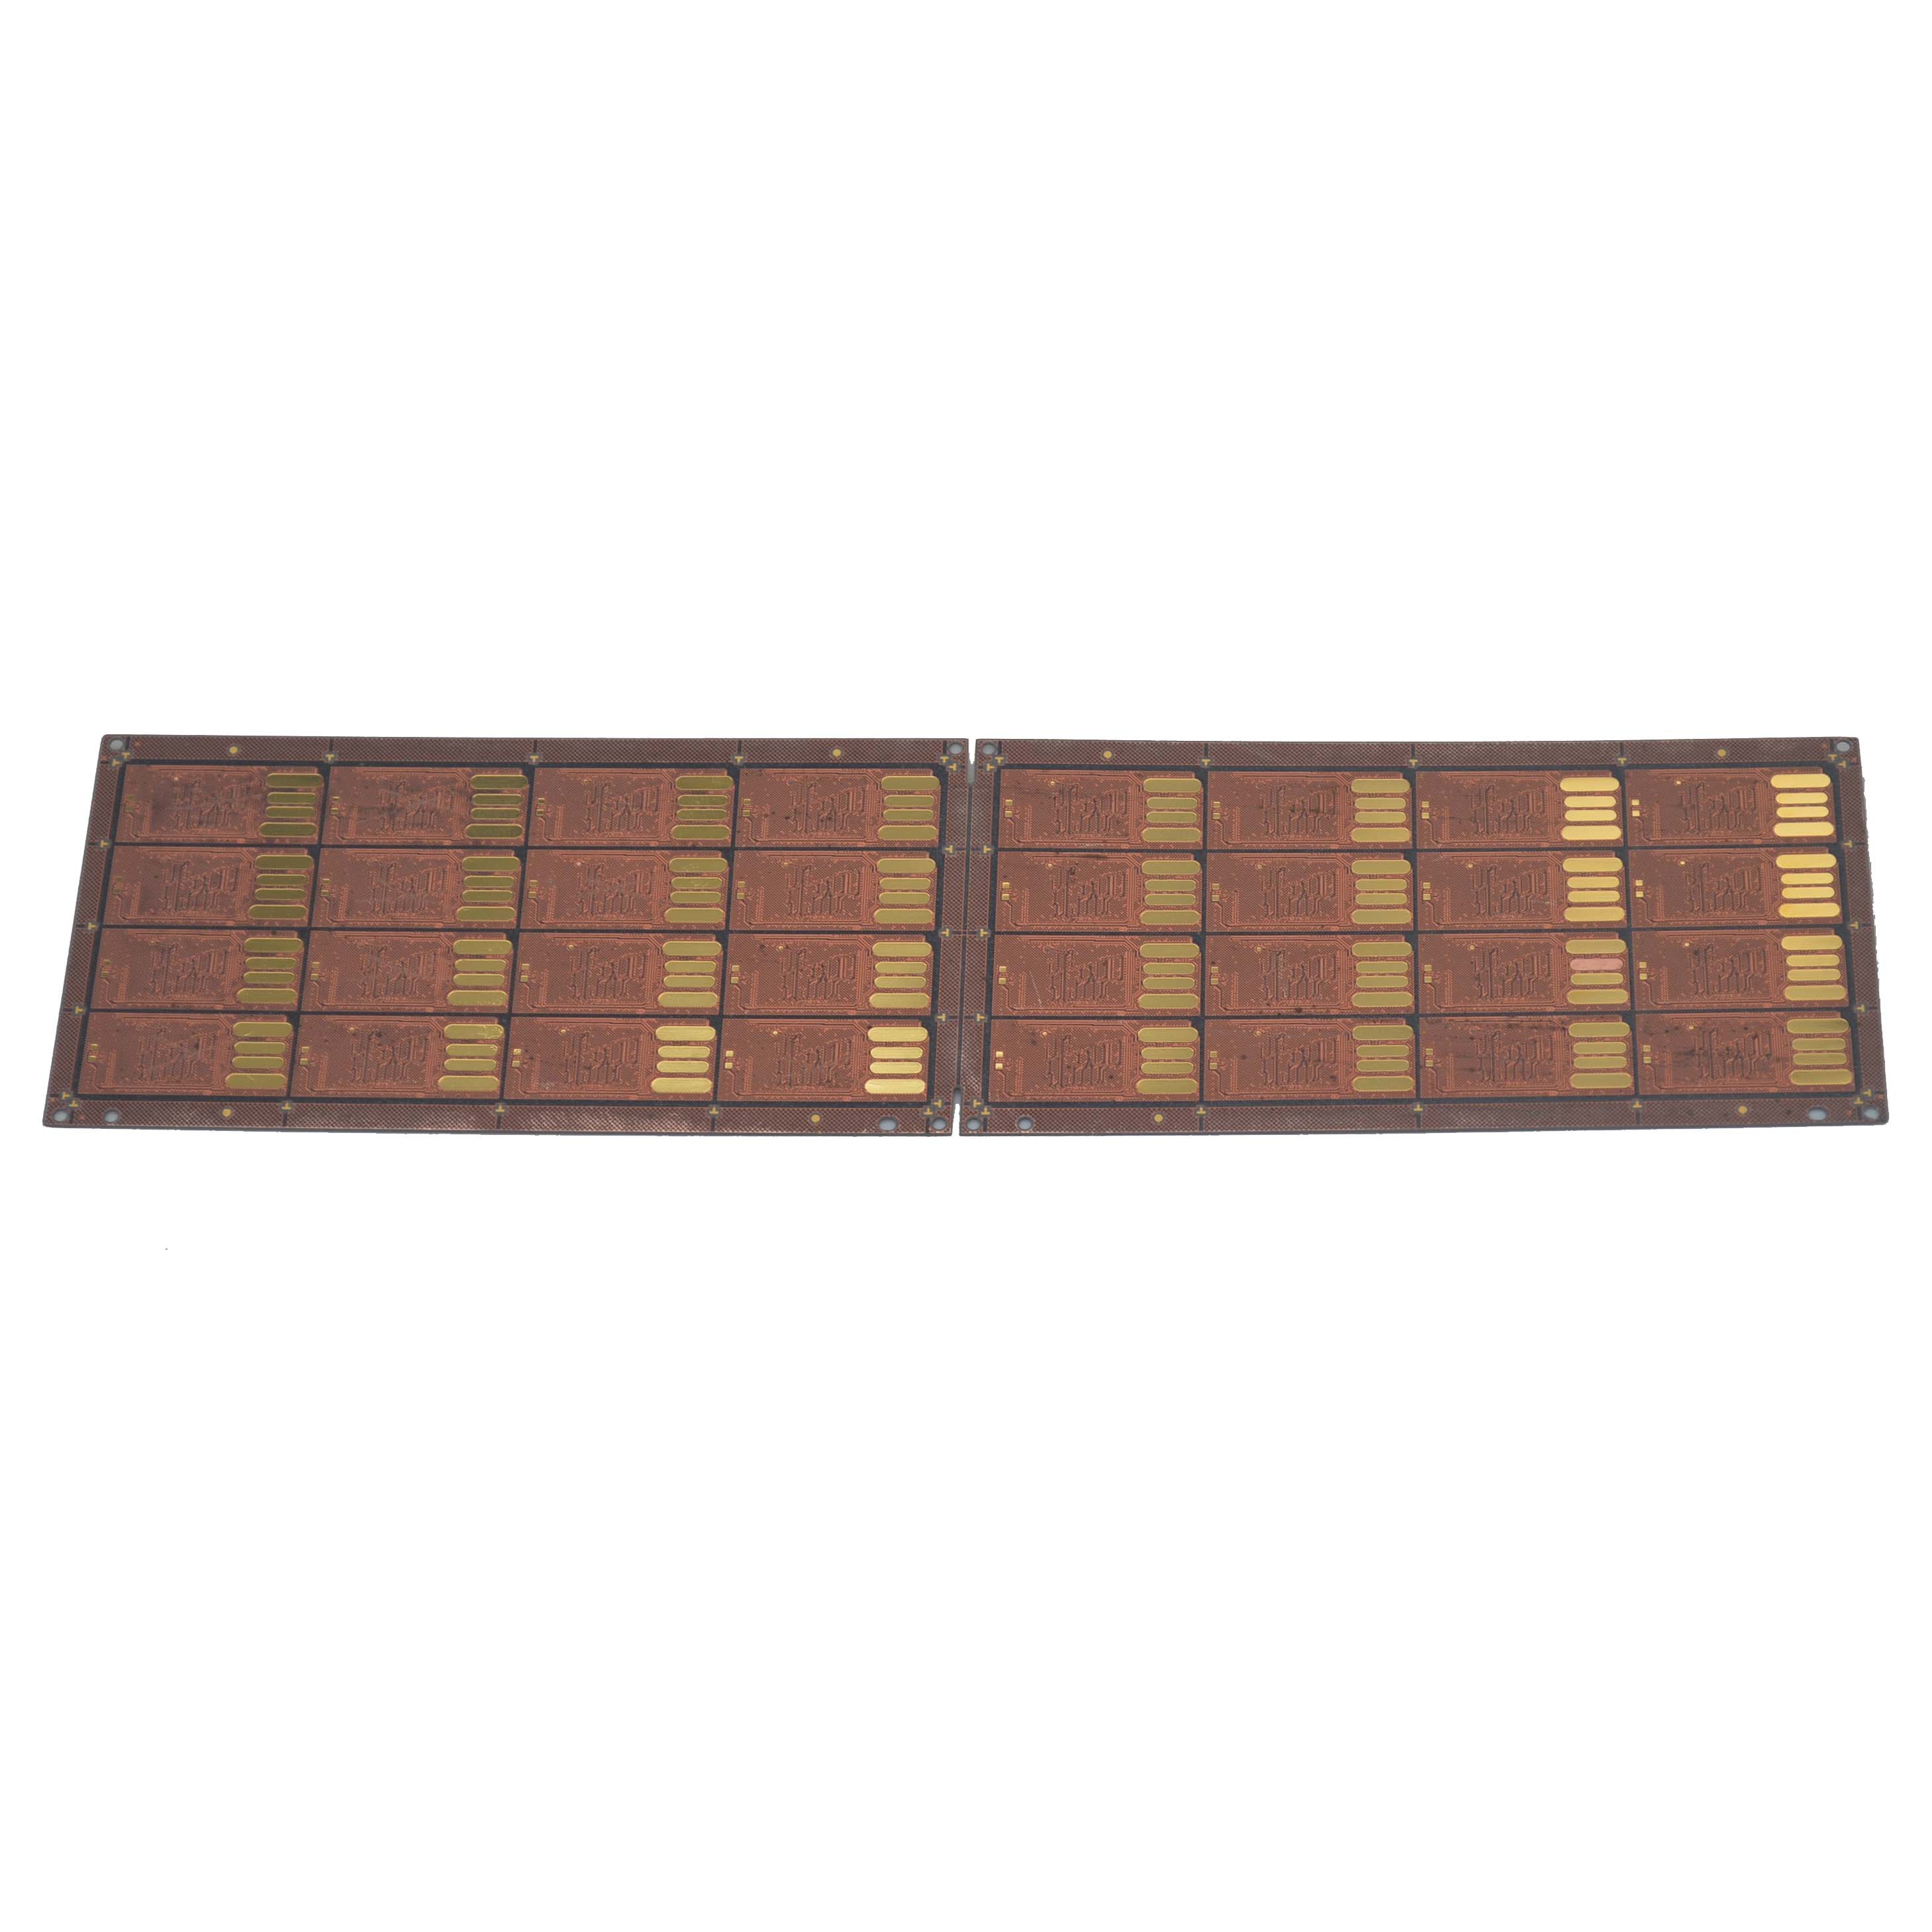 0.2mm 4L BT memory substrate manufacture JEDEC standard